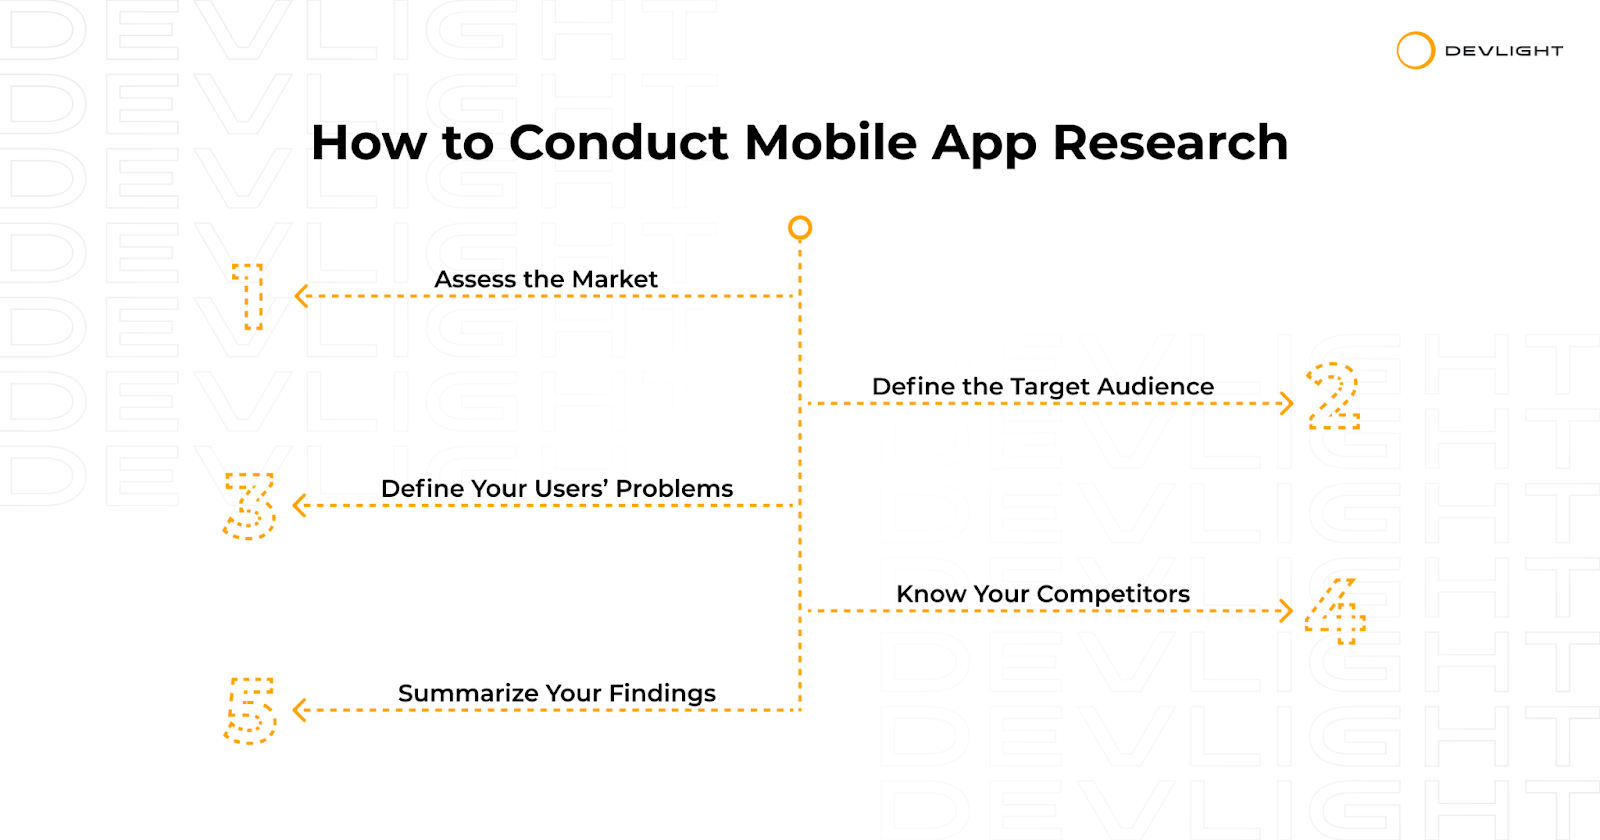 mobile apps research paper topics